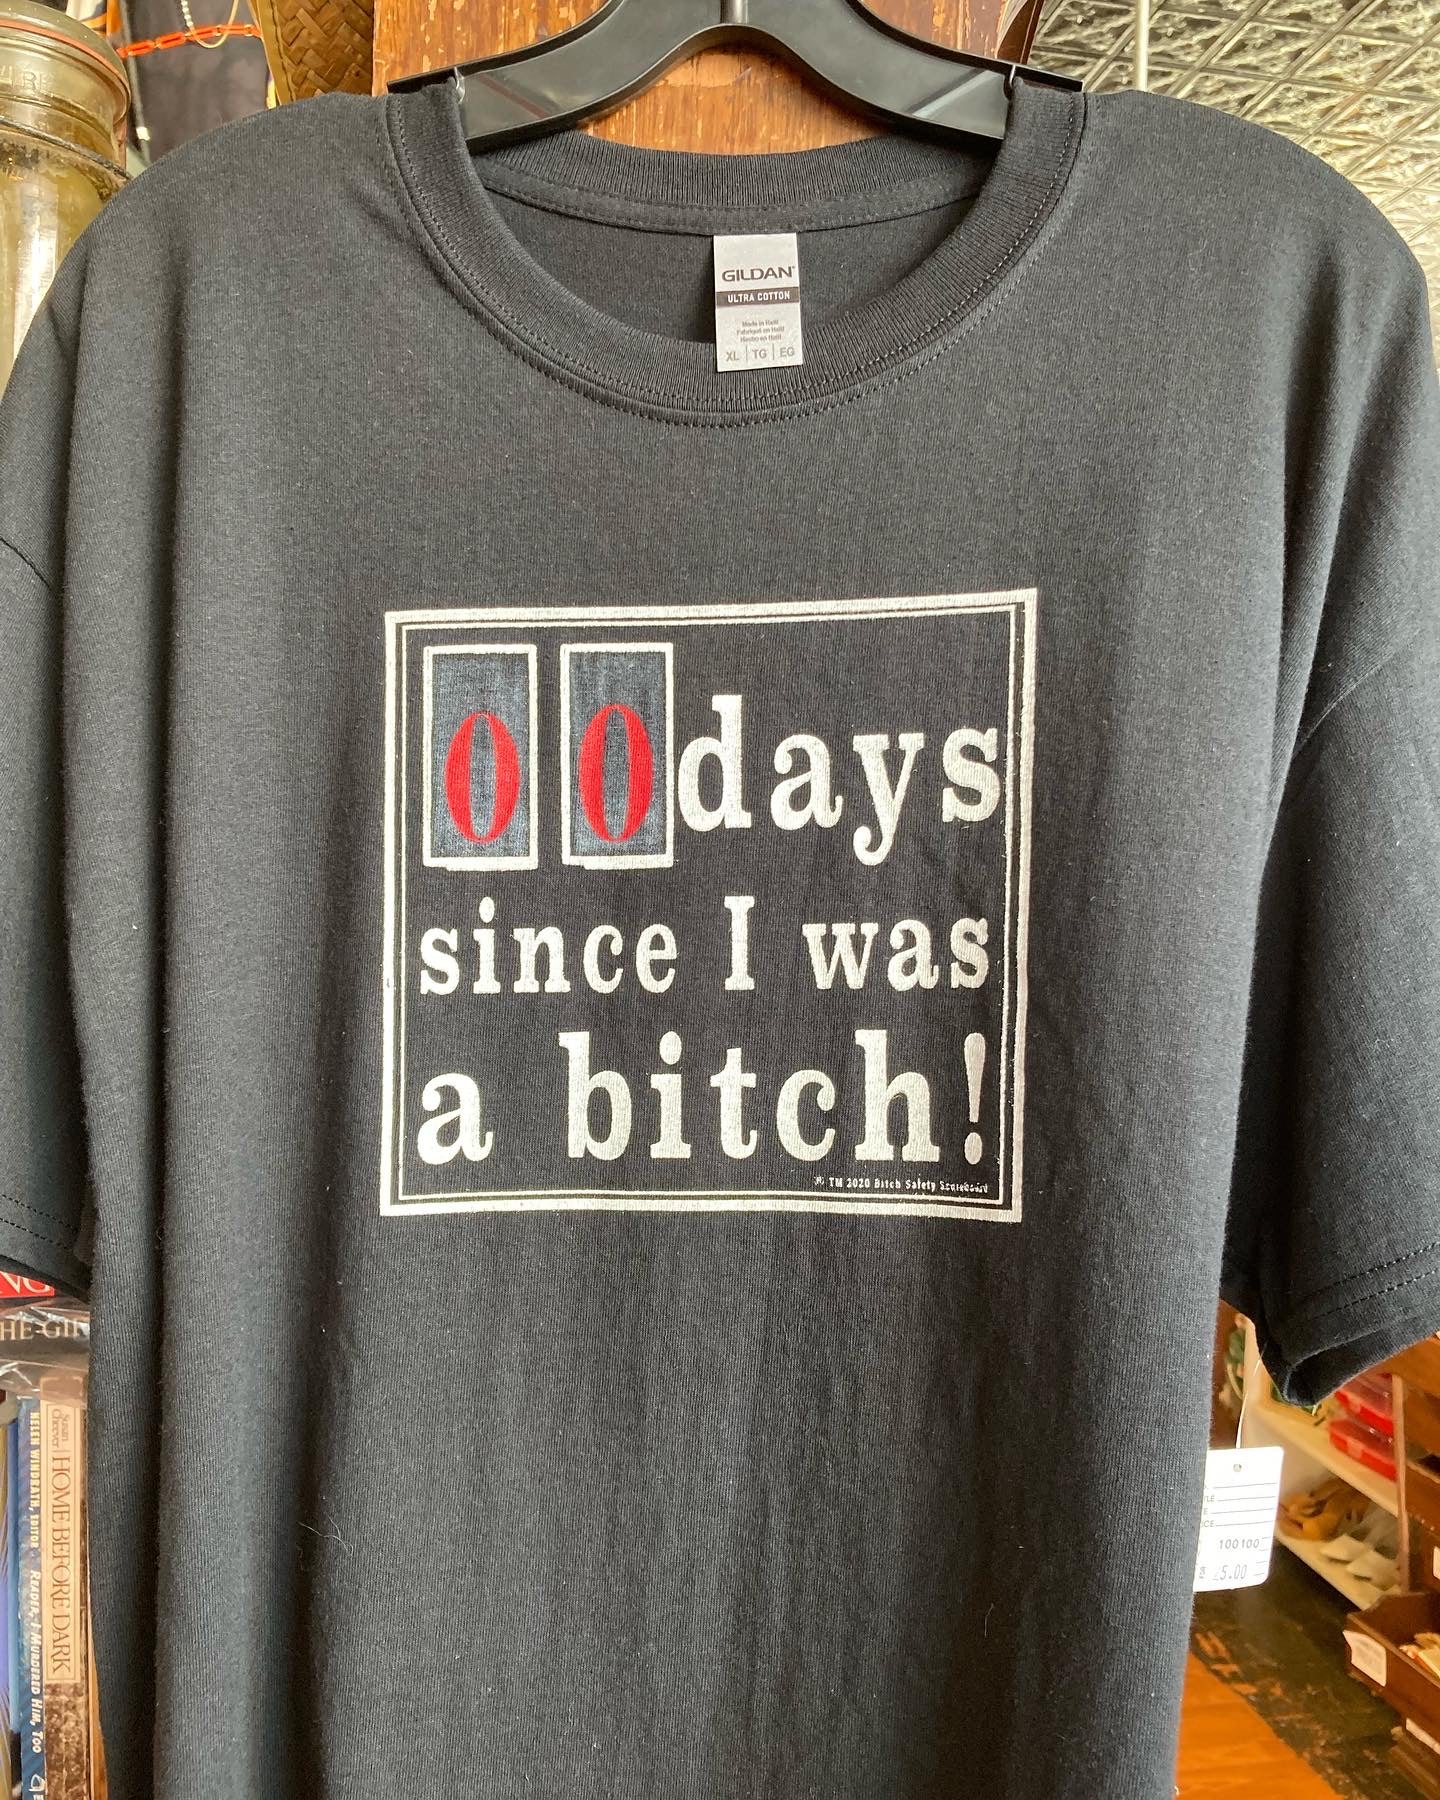 Bitch Safety Scoreboard ™ "00 Day Since I Was a Bitch™" T-shirt in Black